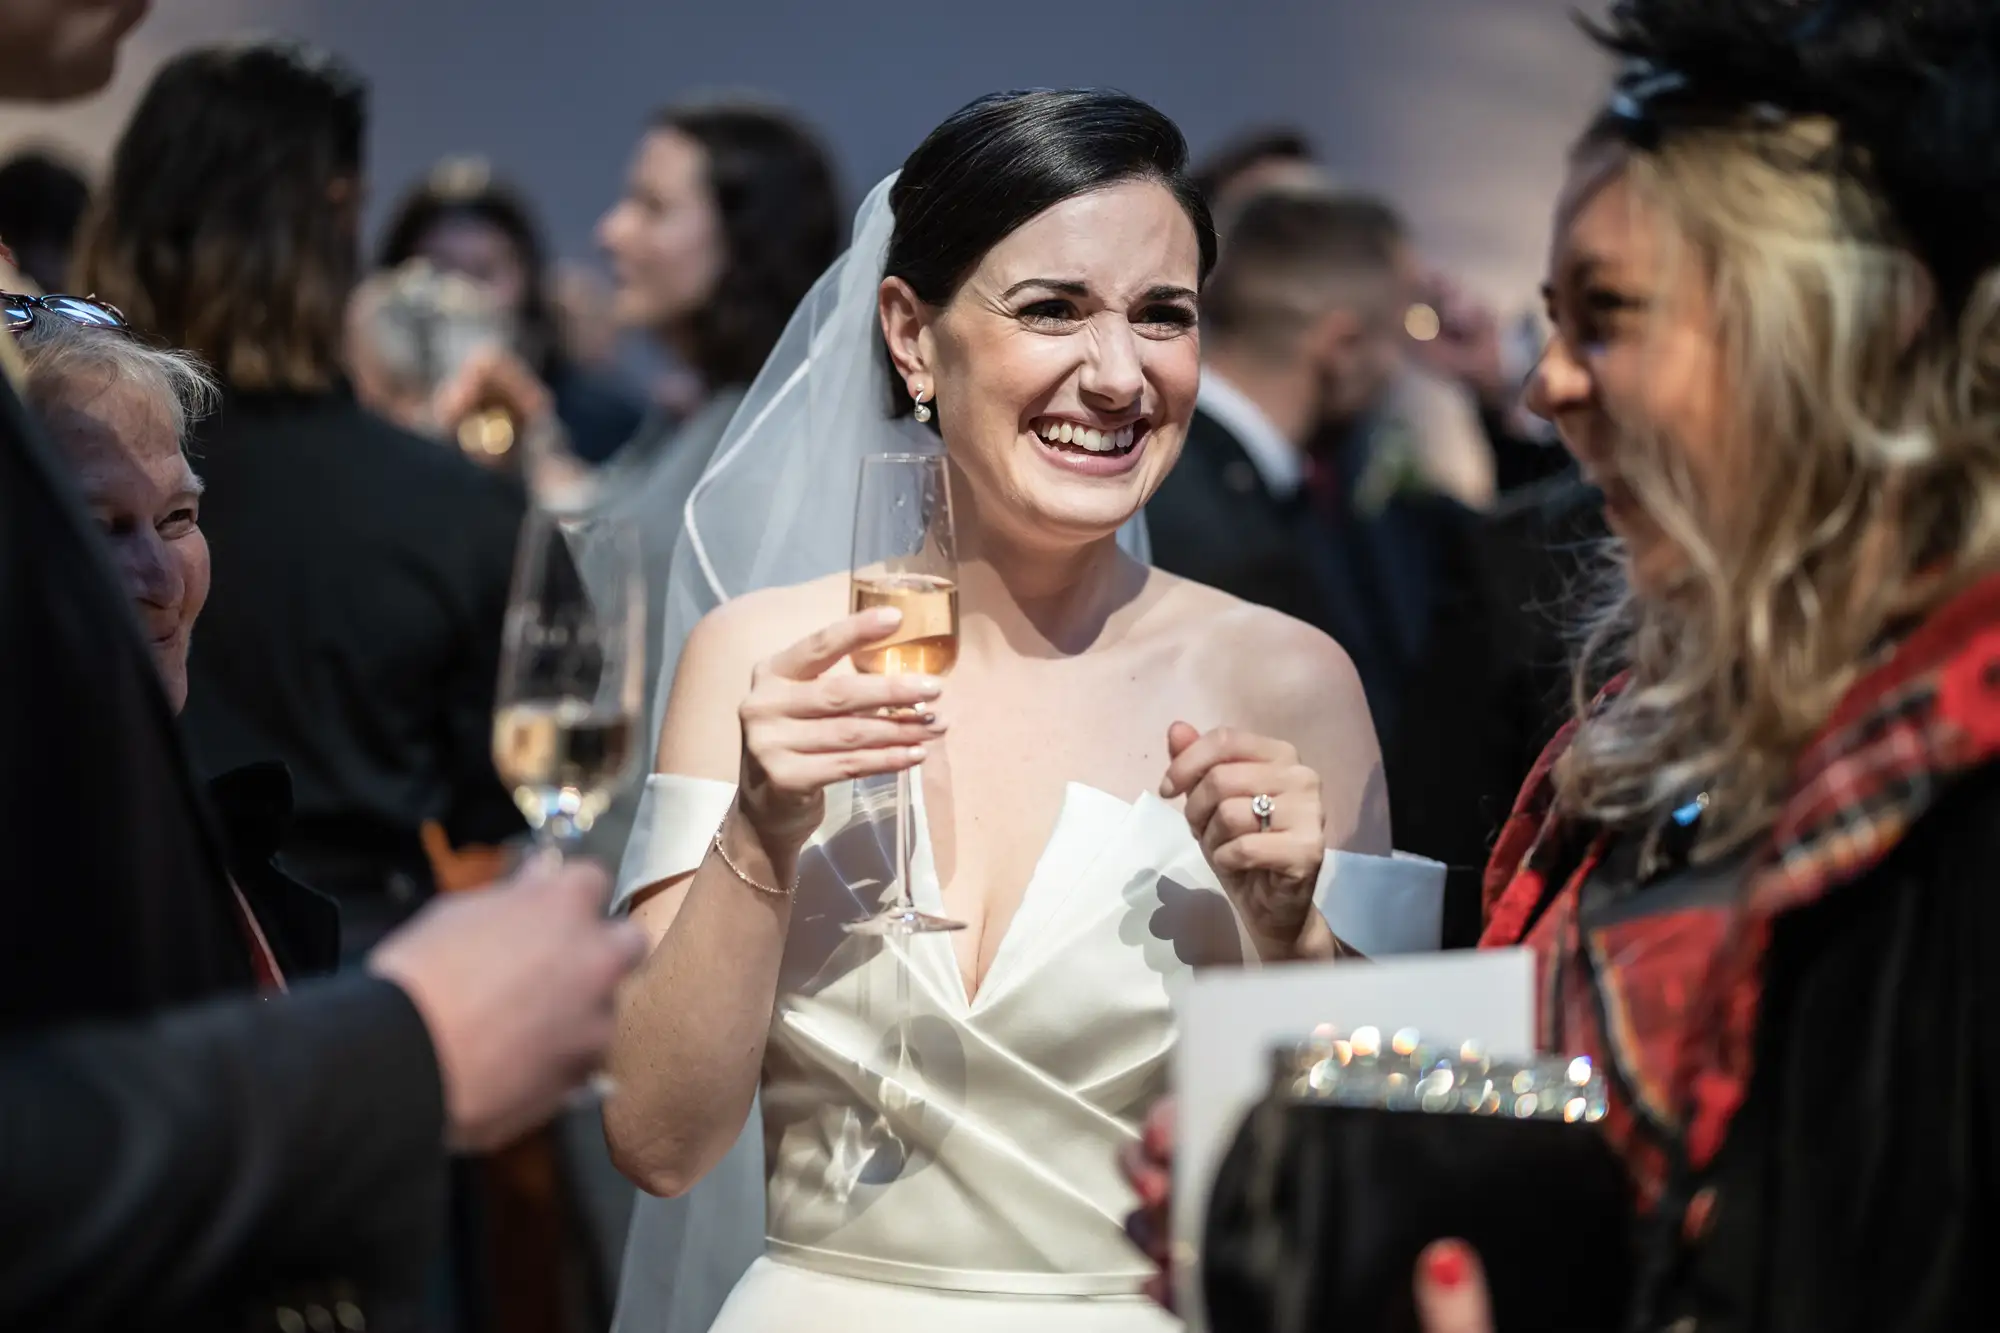 A bride in a white dress and veil laughs joyfully while holding a champagne glass, surrounded by guests at a wedding reception.